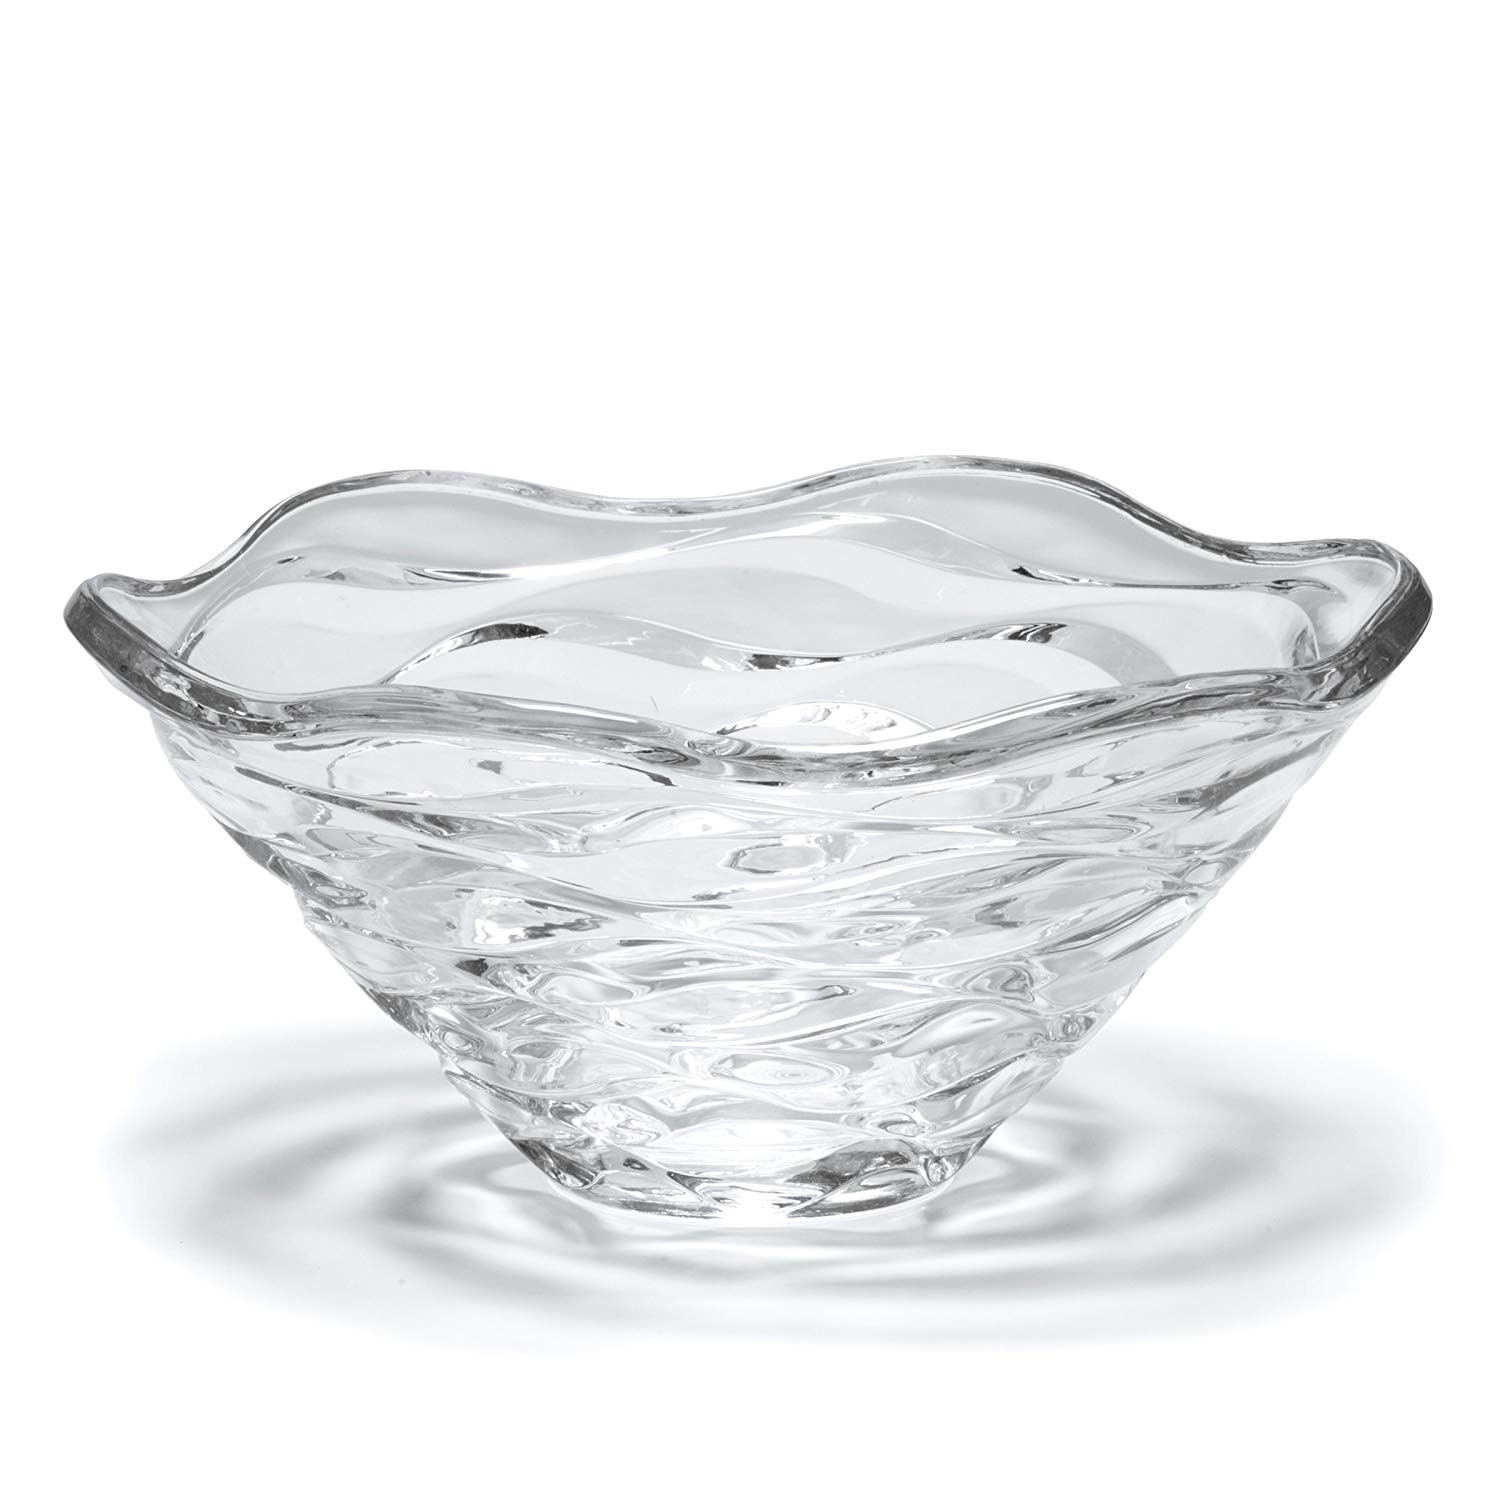 26 Lovable Marquis by Waterford Sheridan Flared 11 Inch Vase 2024 free download marquis by waterford sheridan flared 11 inch vase of amazon com mikasa atlantic crystal decorative bowl 11 5 inch intended for amazon com mikasa atlantic crystal decorative bowl 11 5 inch ce